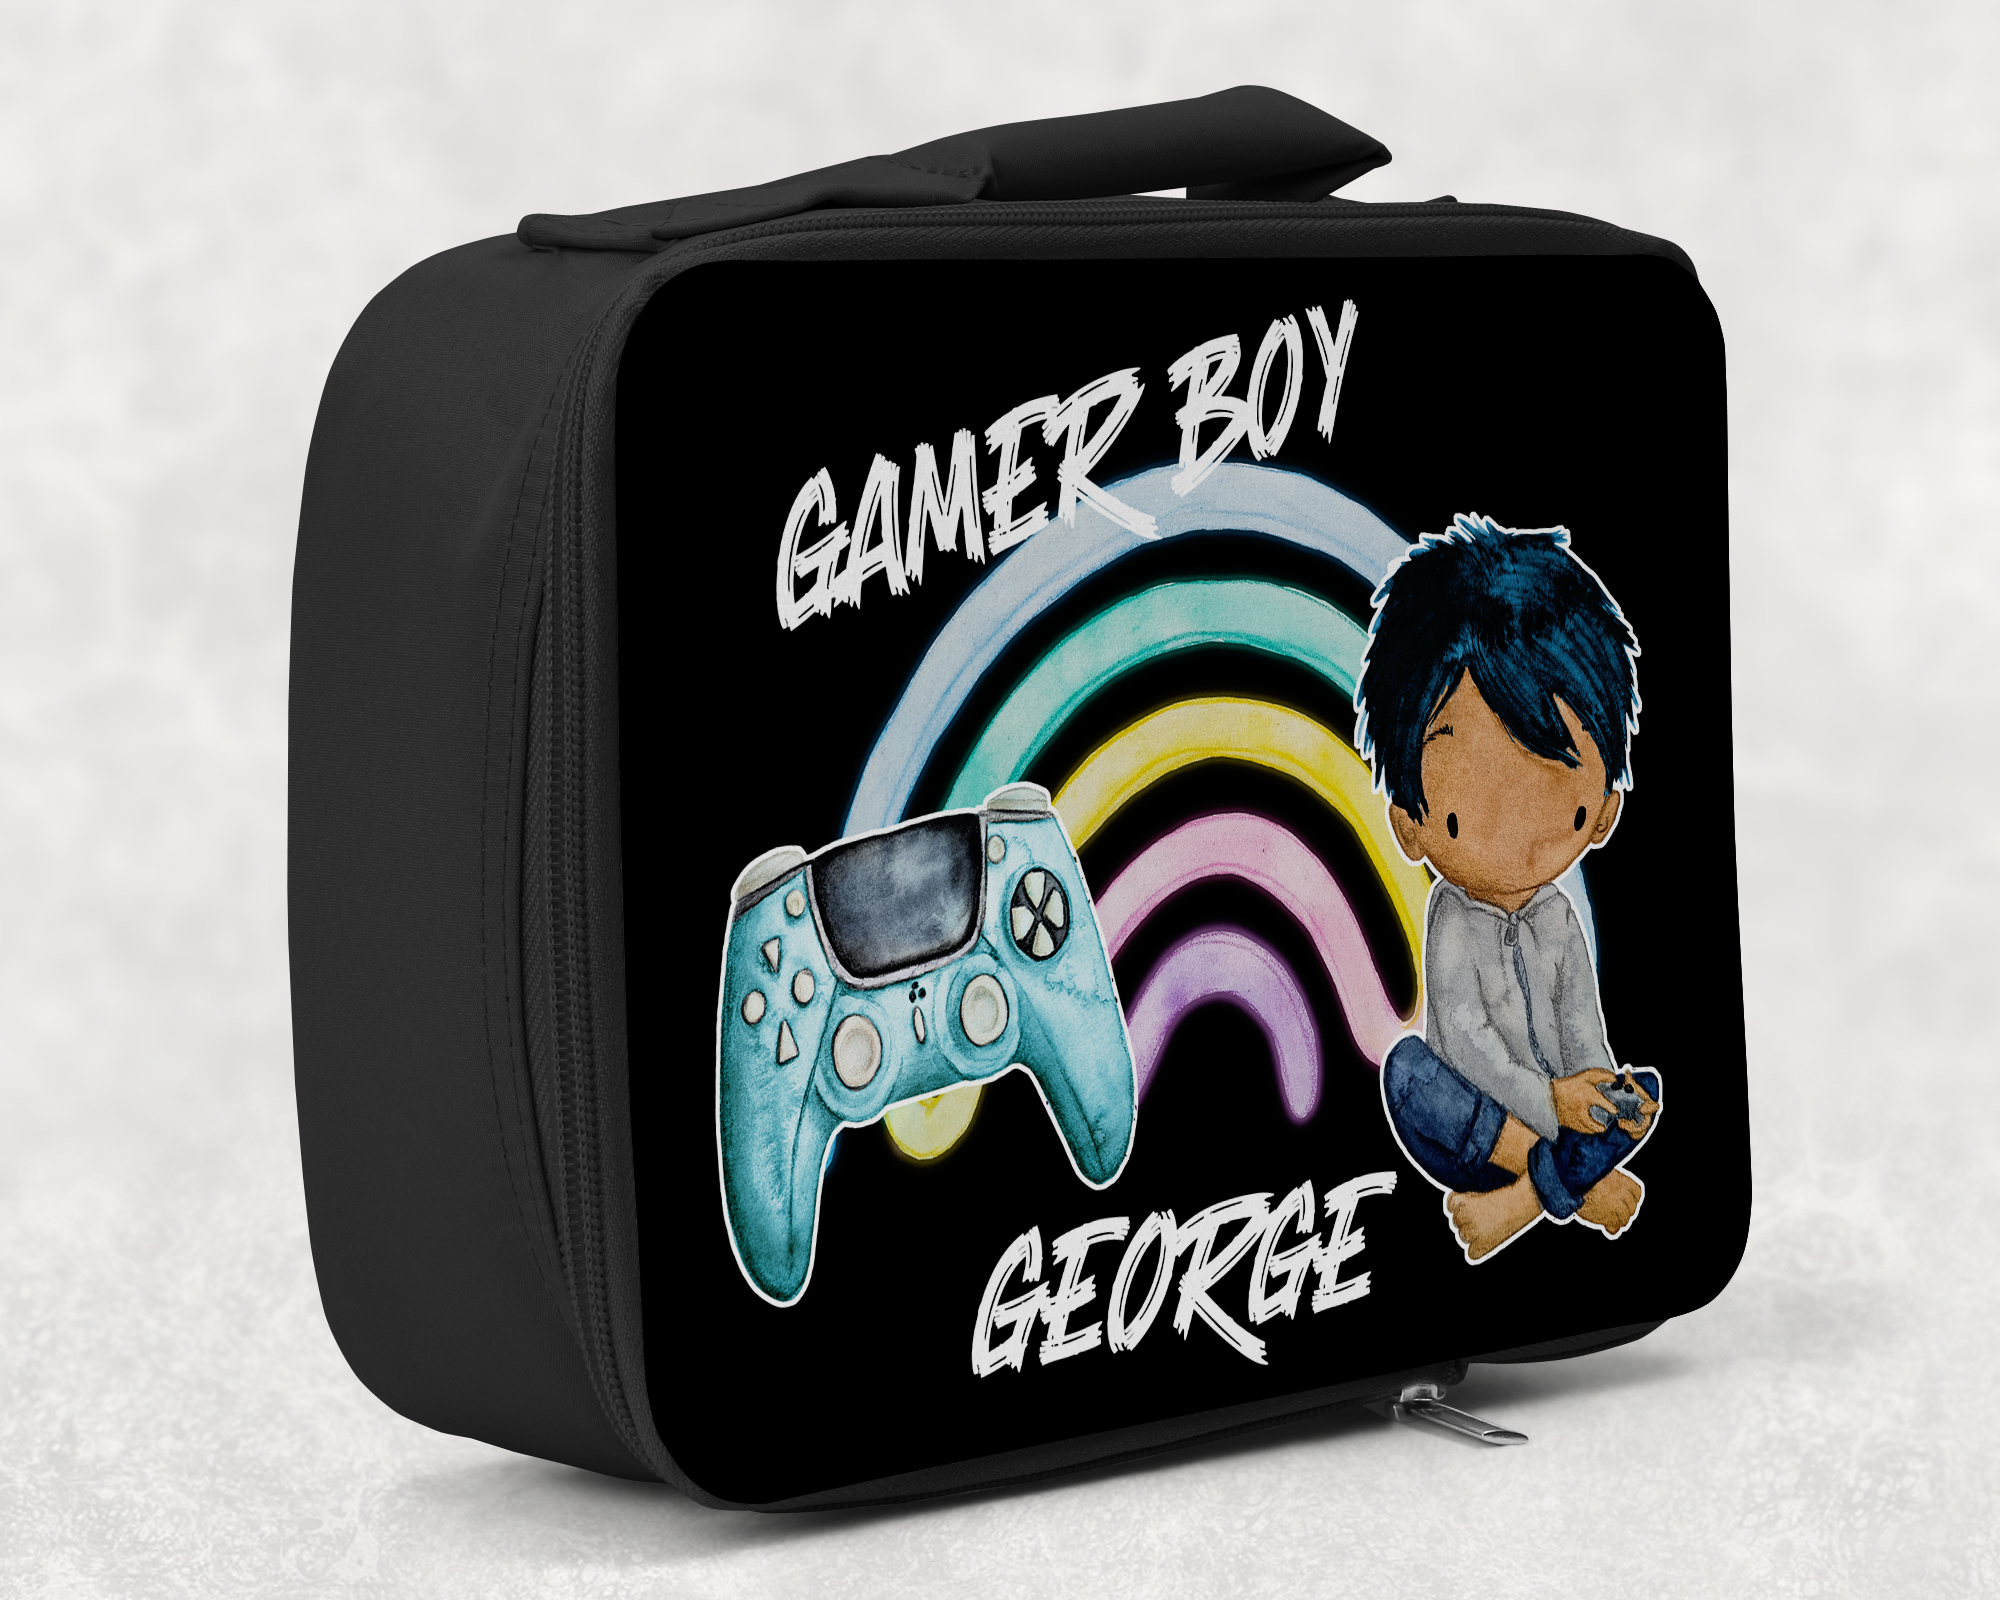 children's insulated lunch bag with bright colourful personalised printed design in gamer boy theme